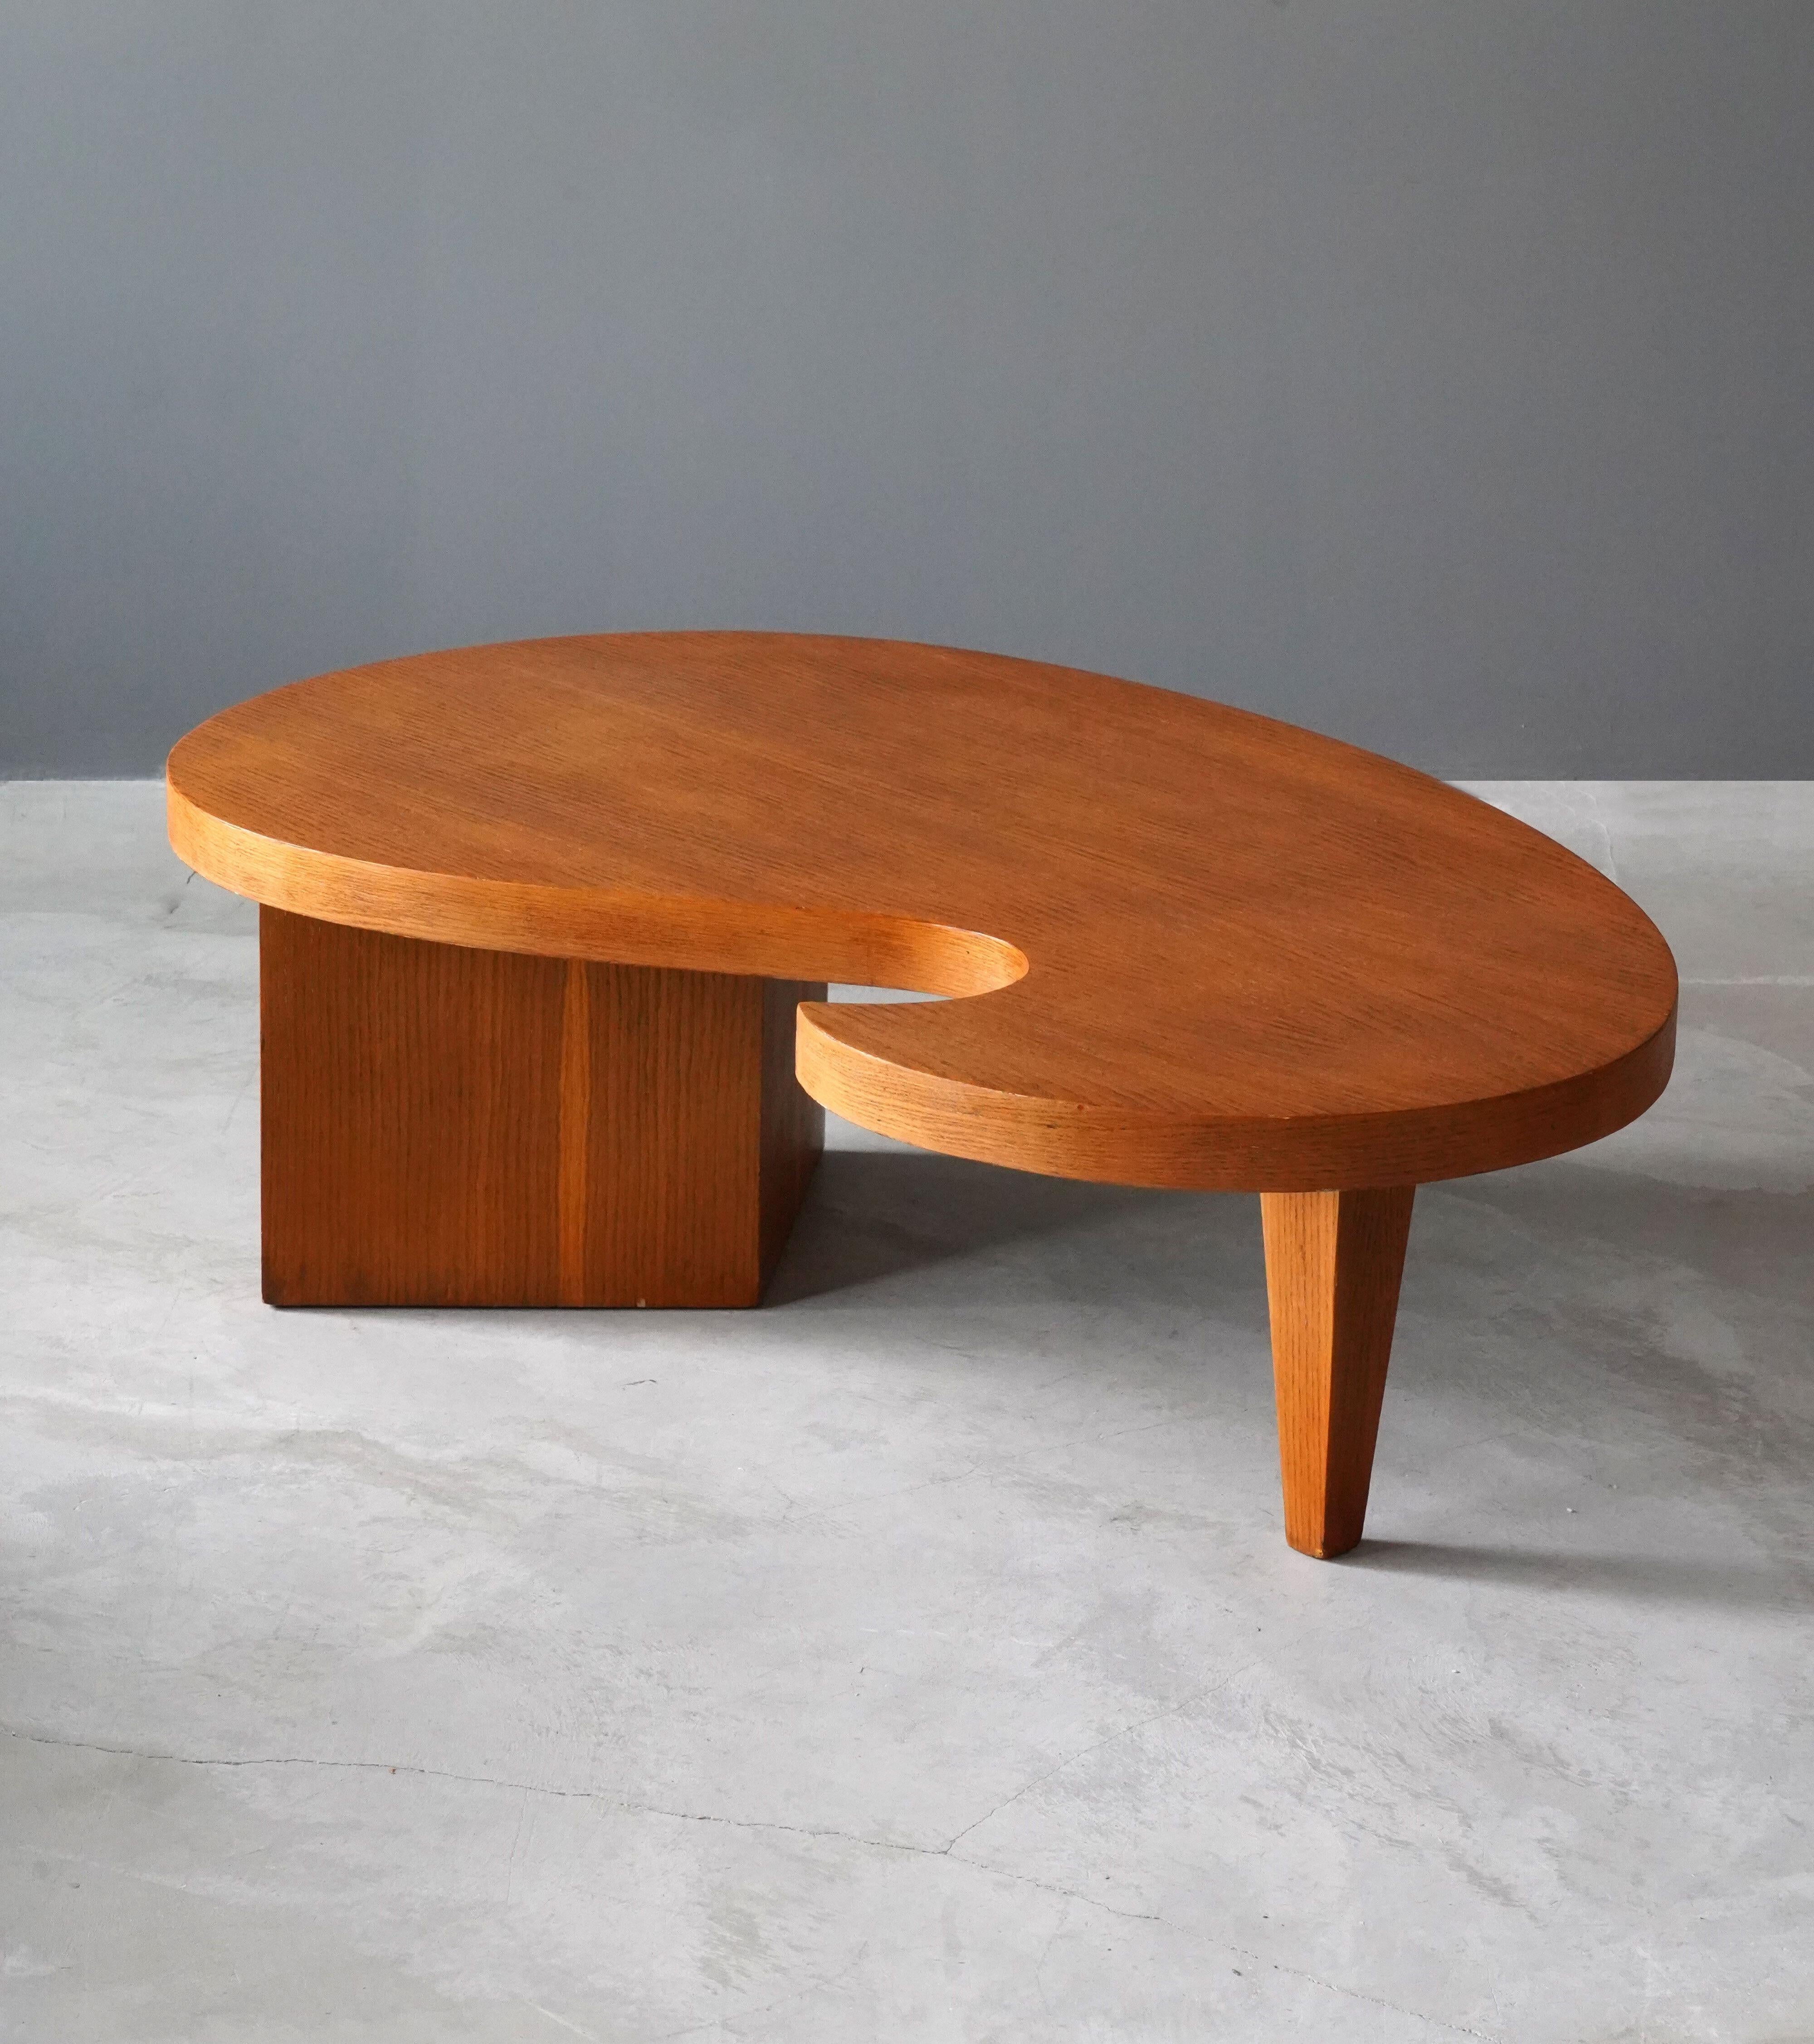 A freeform coffee table, designed and produced in America, c. 1950s. 

Other designers of the period include Paul Frankl, Isamu Noguchi, T.H. Robsjohn-Gibbings, Paul Laszlo, and Jean Royère.